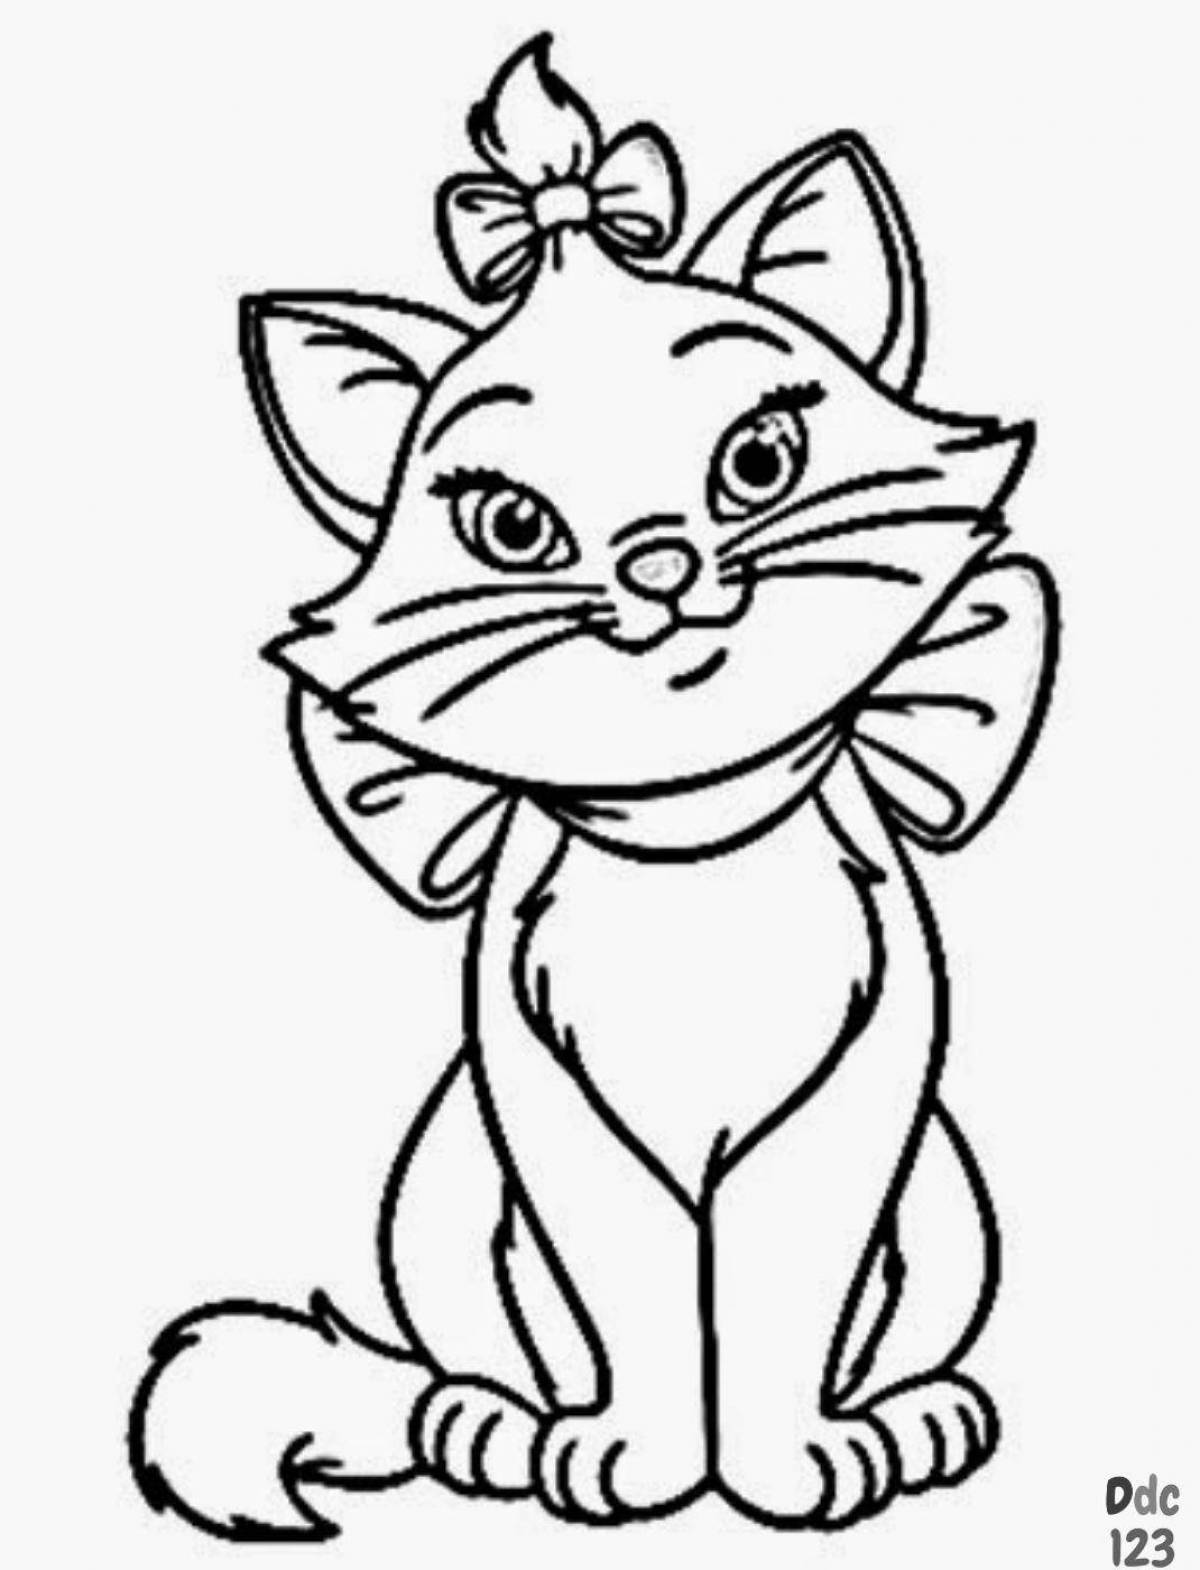 Shiny pussy coloring book for kids